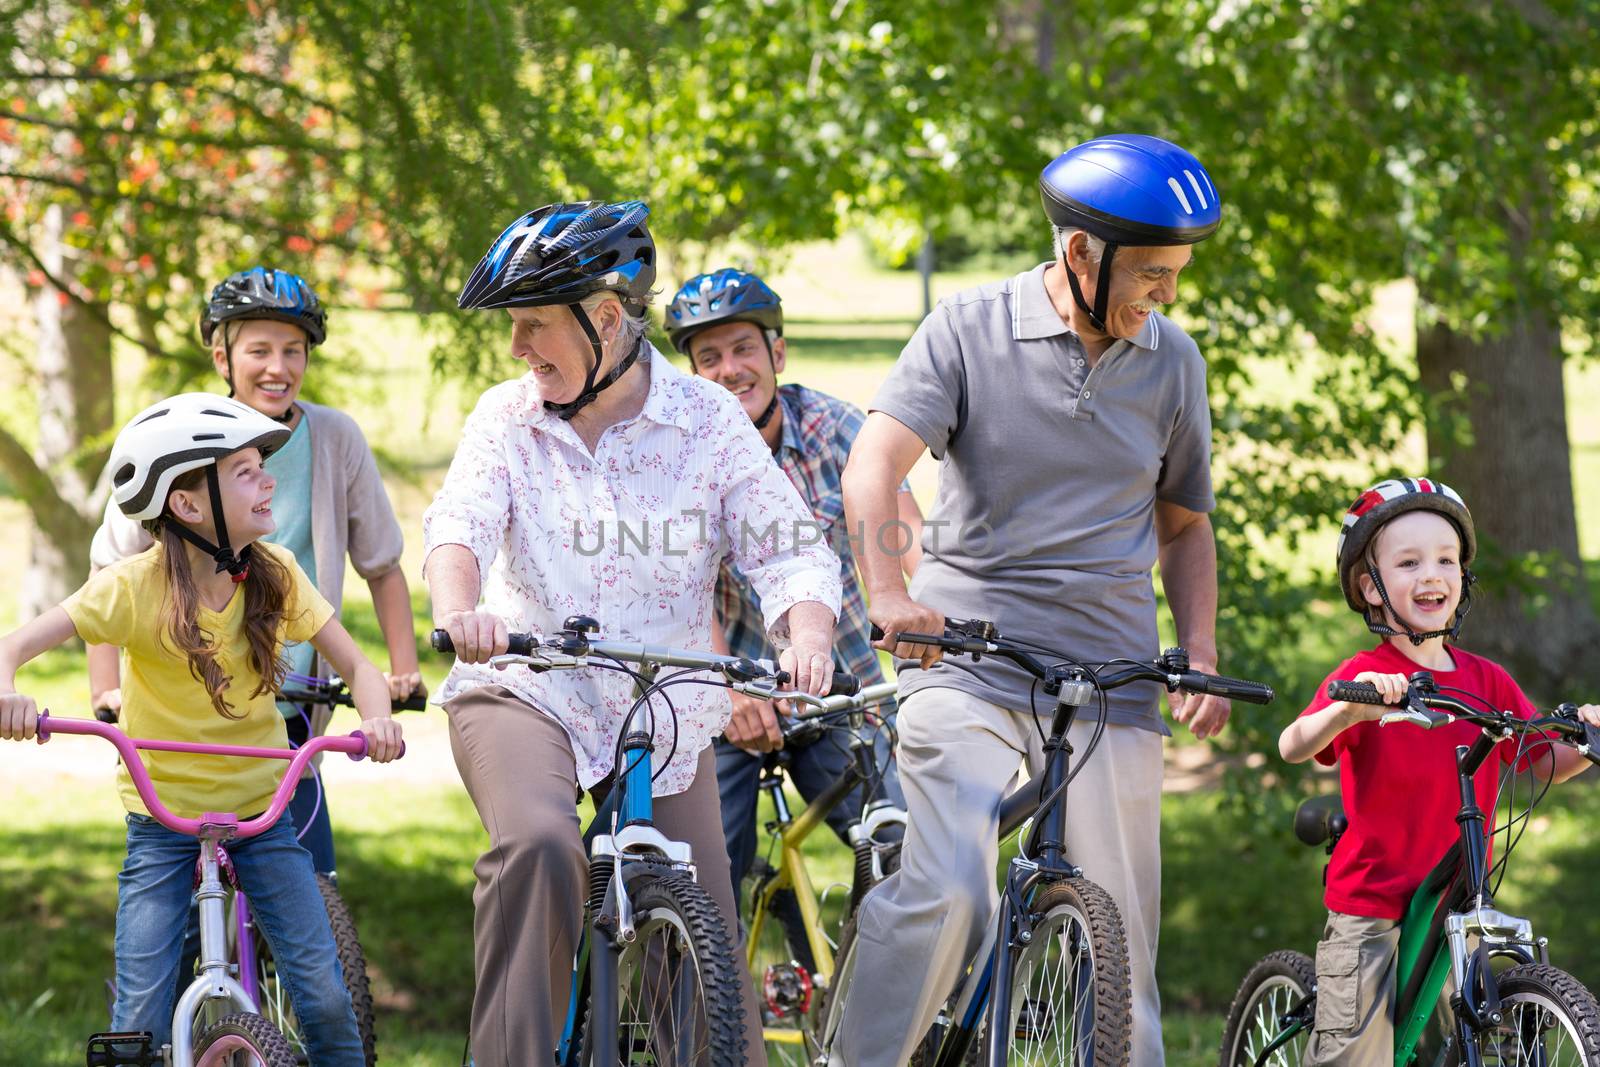 Happy family on their bike at the park  by Wavebreakmedia